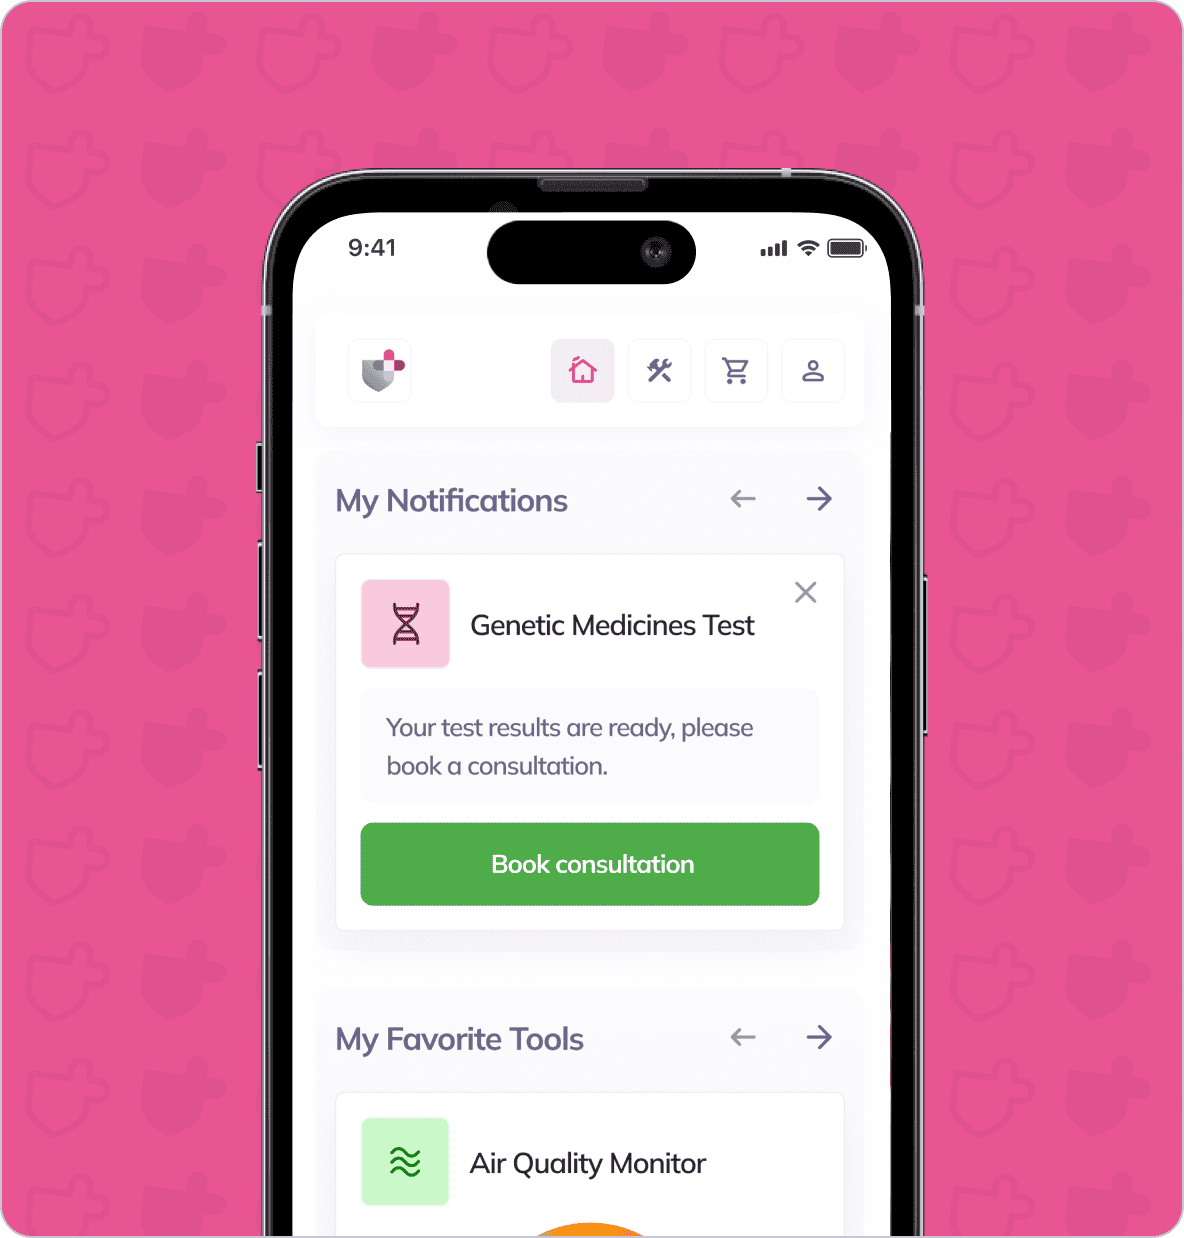 A smartphone screen displays a health app with a notification about Genetic Medicines Test results and a prompt to book a consultation. The background is pink with a subtle shield pattern.